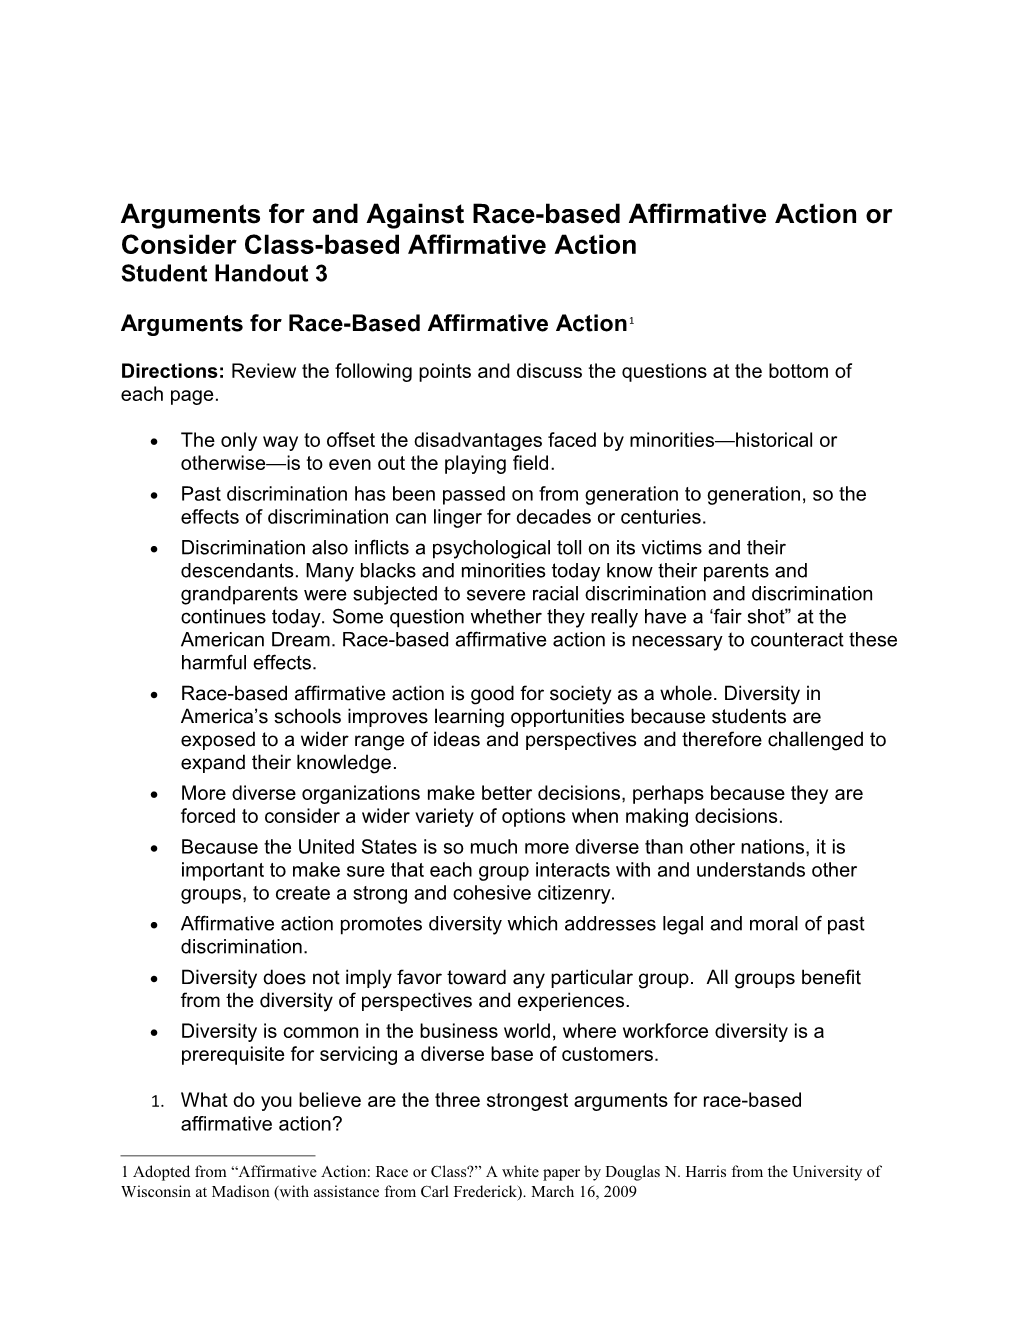 Arguments for and Against Race-Based Affirmative Action Or Consider Class-Based Affirmative